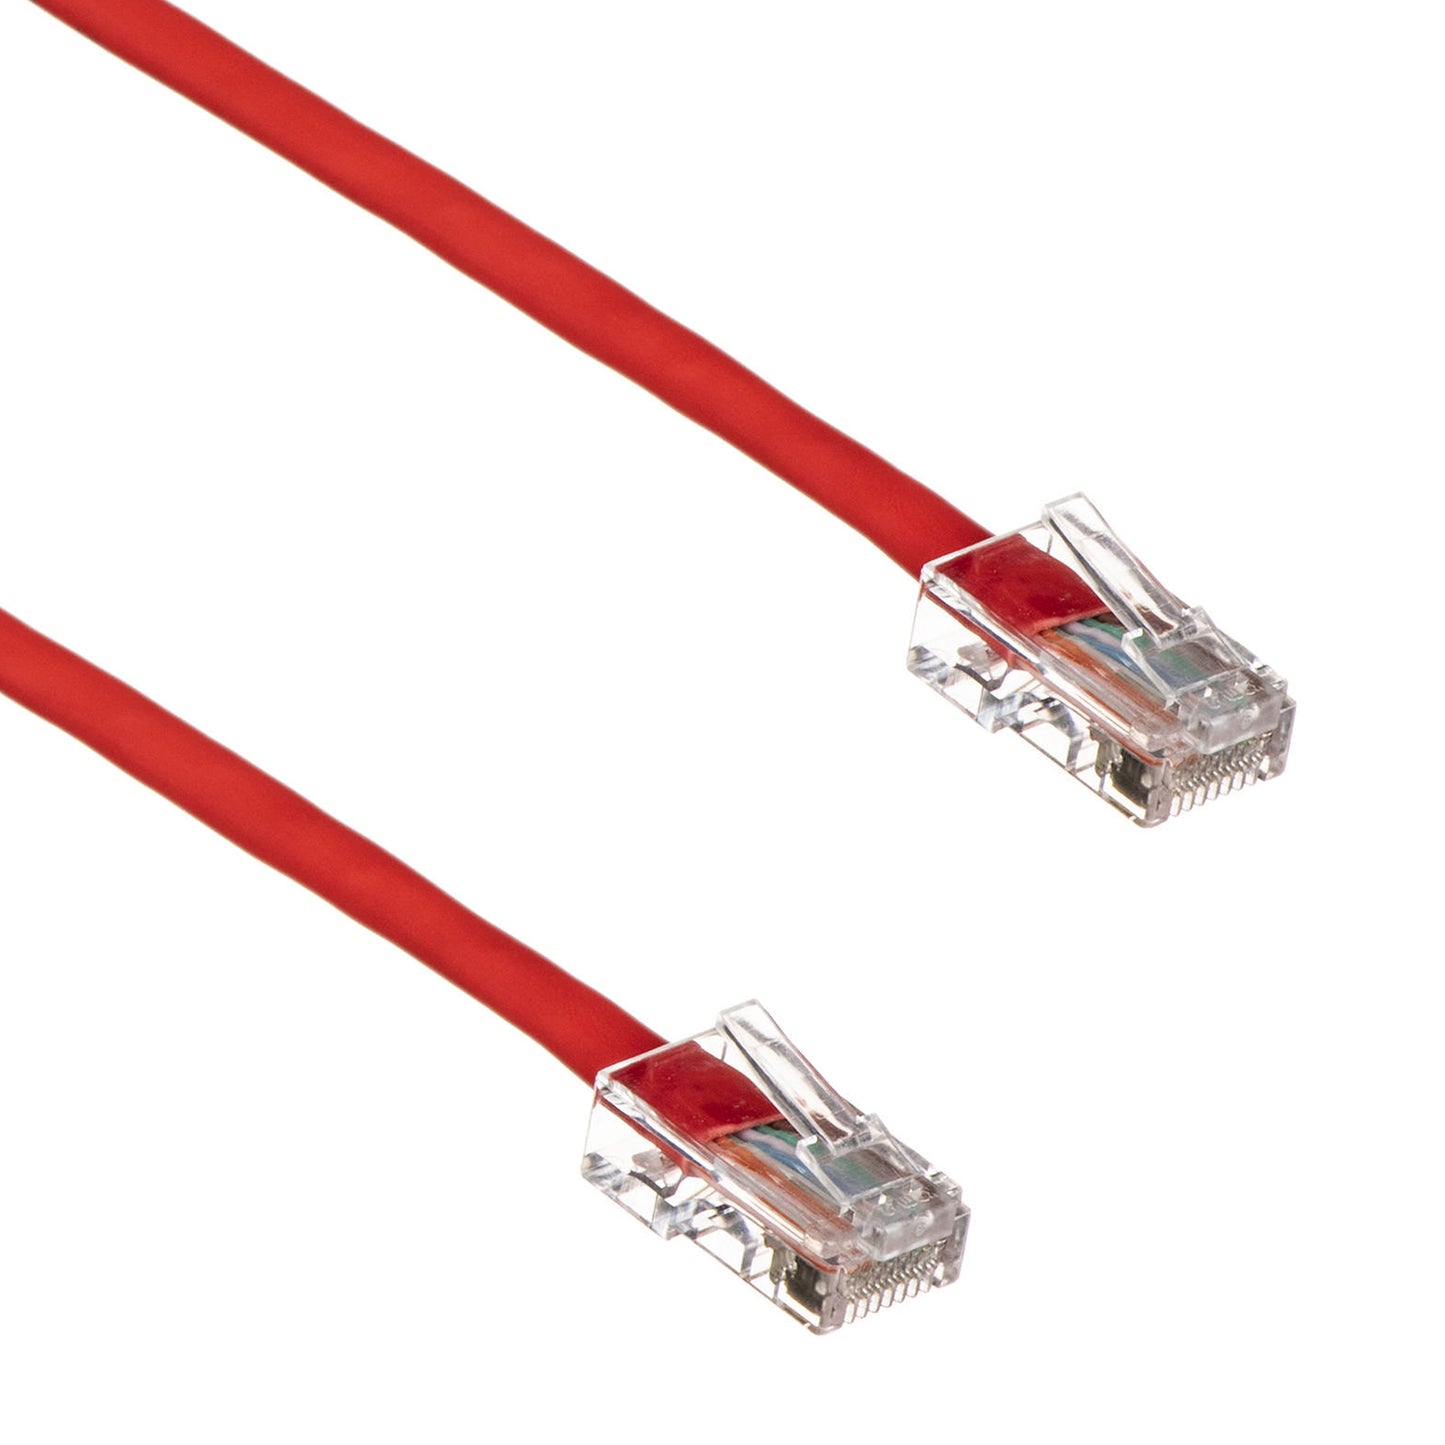 Belkin A3L791-07-RED Cat5e Ethernet Lan Network Patch Cable - 7ft. - Each - USA Supply